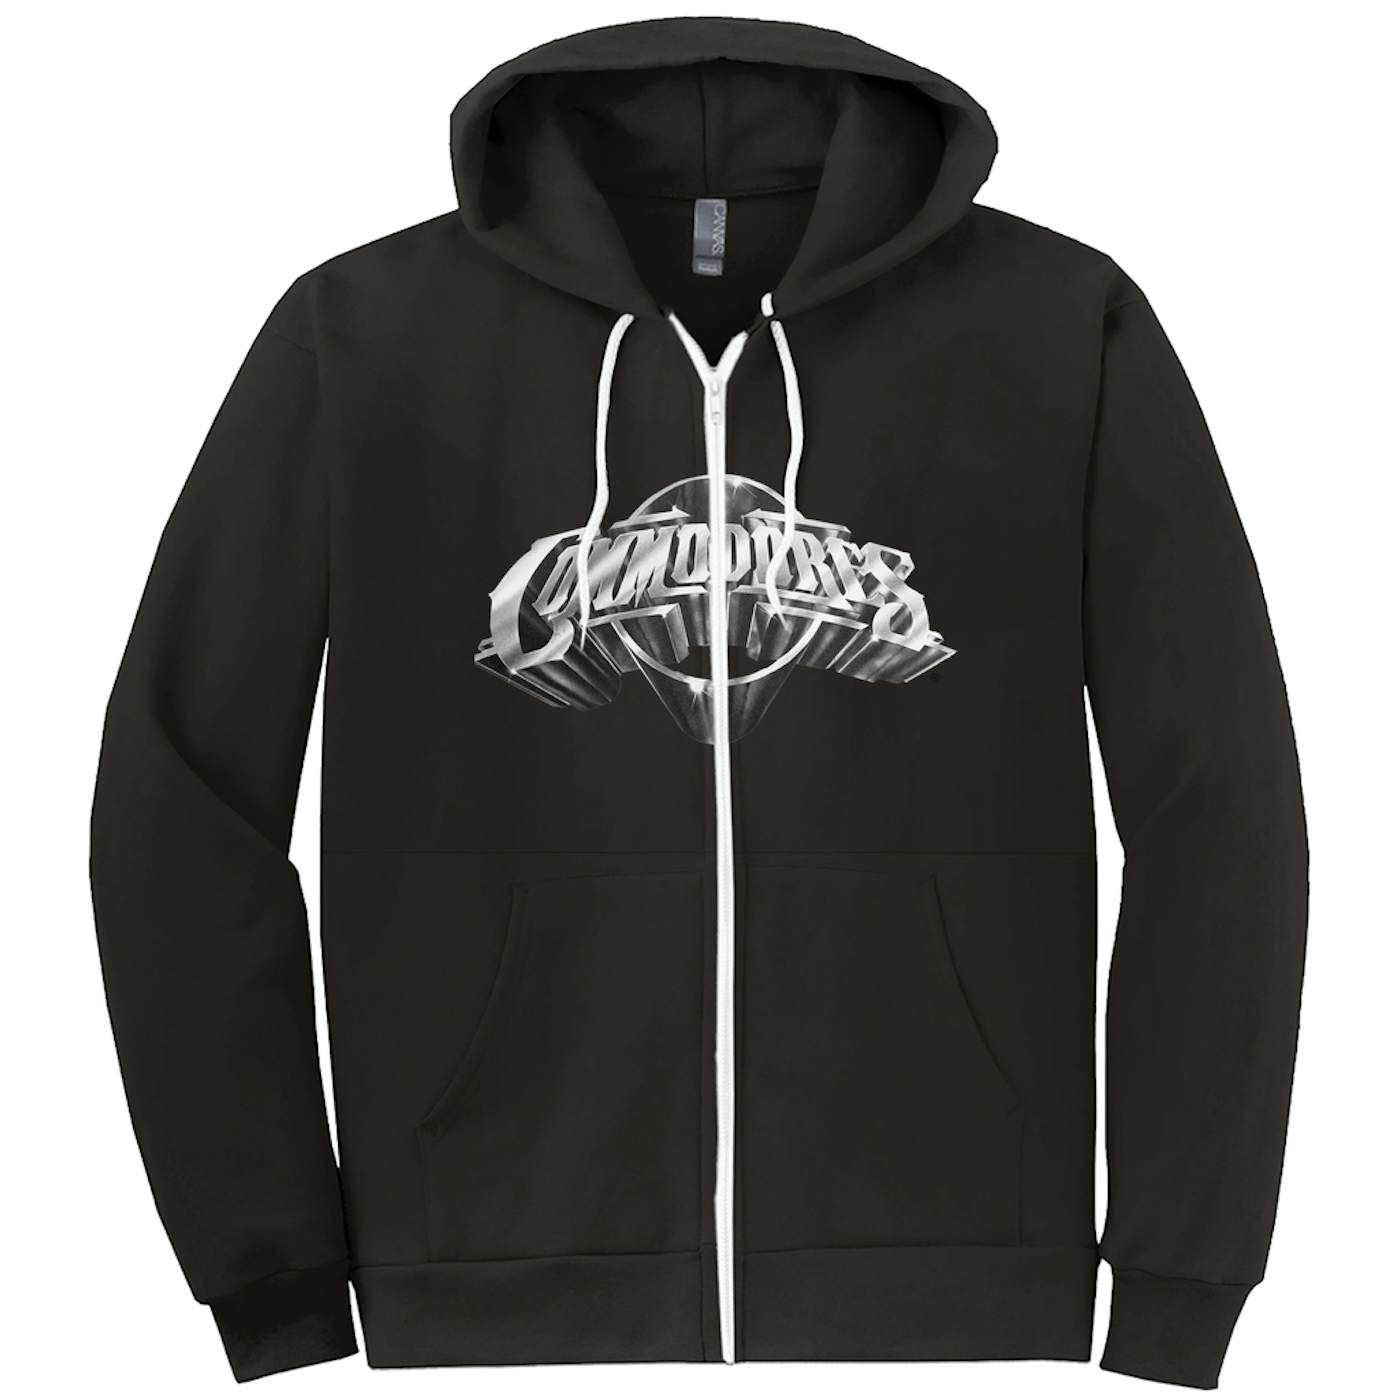 Commodores Classic Logo Zip-Up Hoodie (Black / Silver)